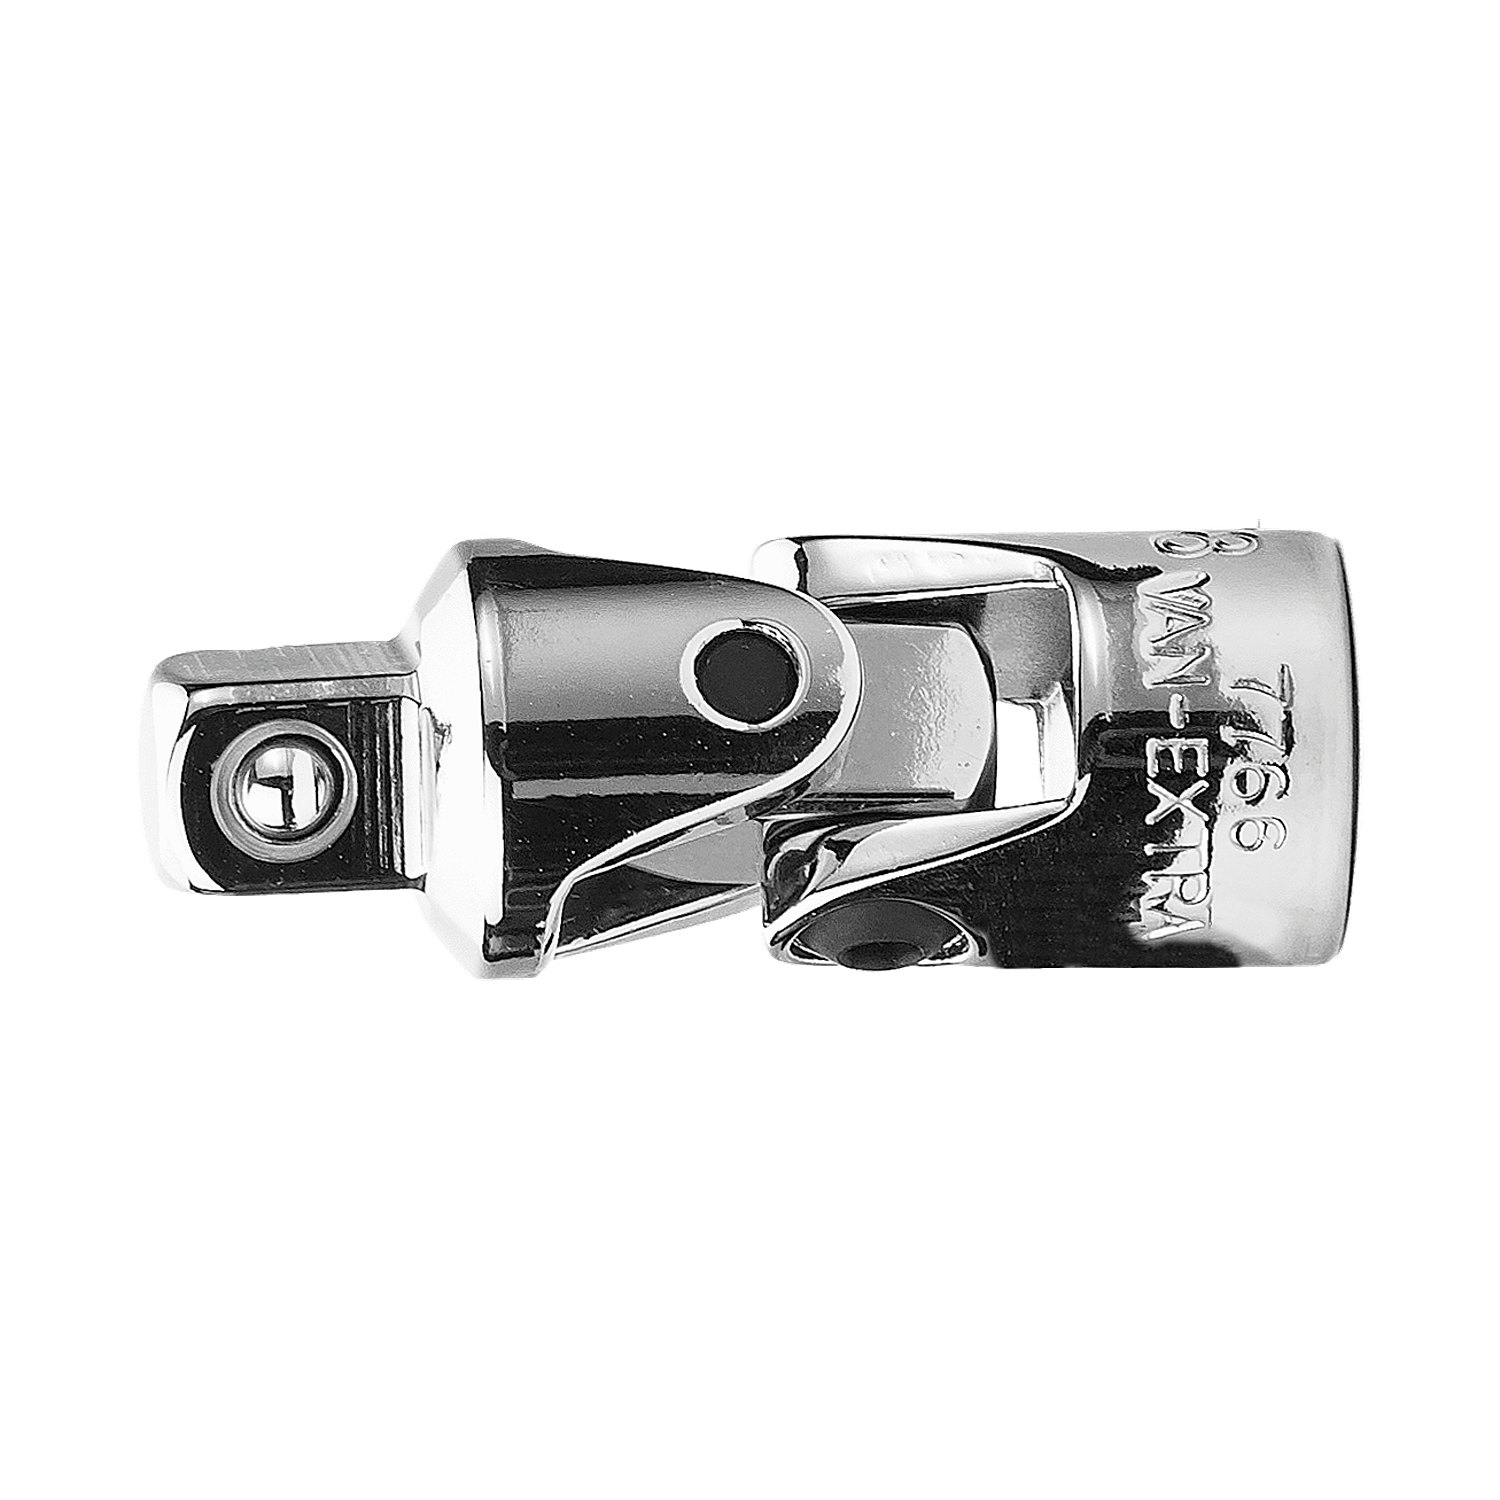 BAHCO 7766 3/8" Square Drive Universal Joint (BAHCO Tools) - Premium Universal Joint from BAHCO - Shop now at Yew Aik.